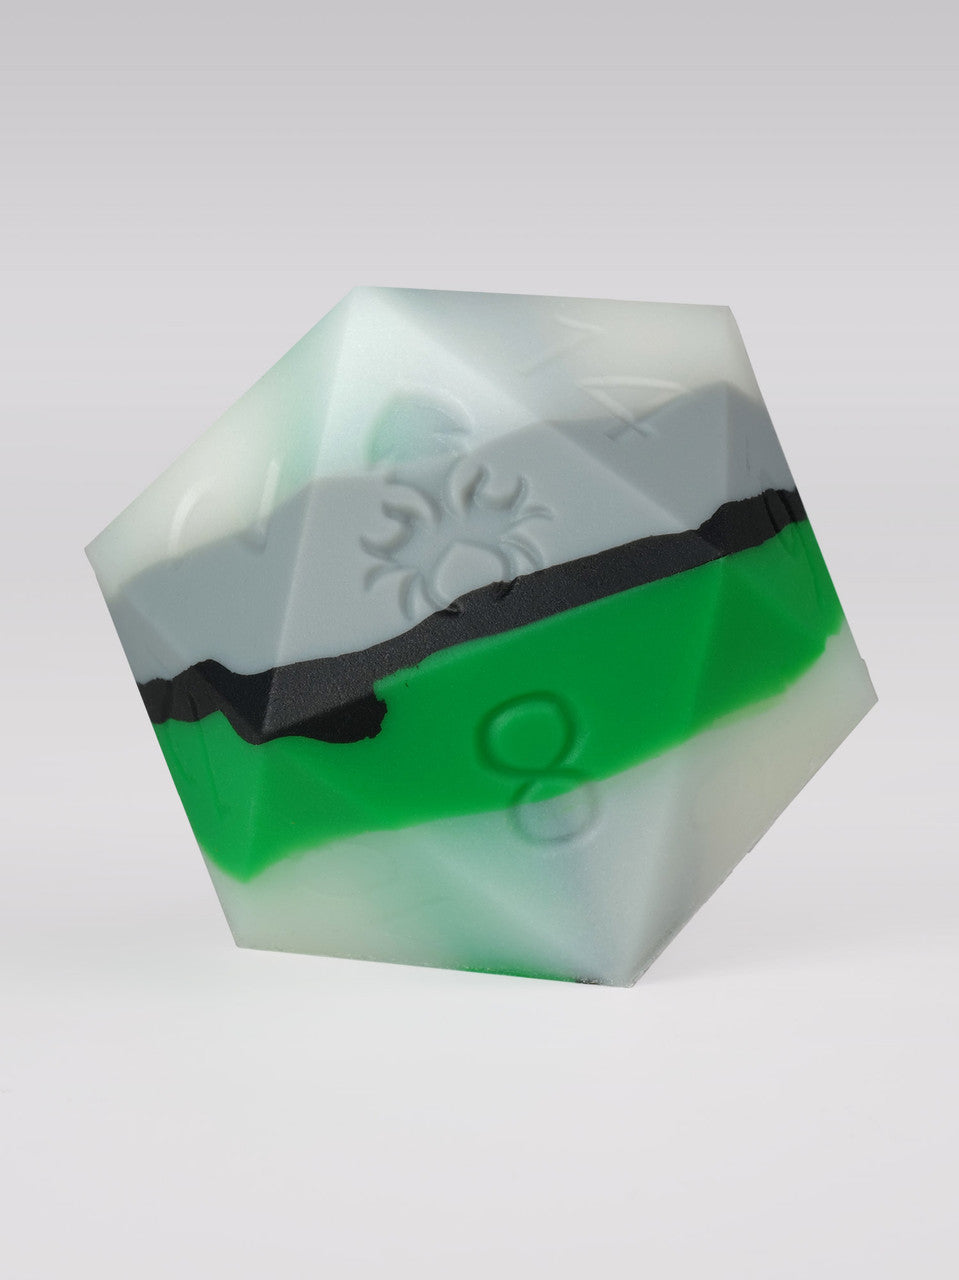 Green/Grey Glow in the Dark 50mm Silicone D20